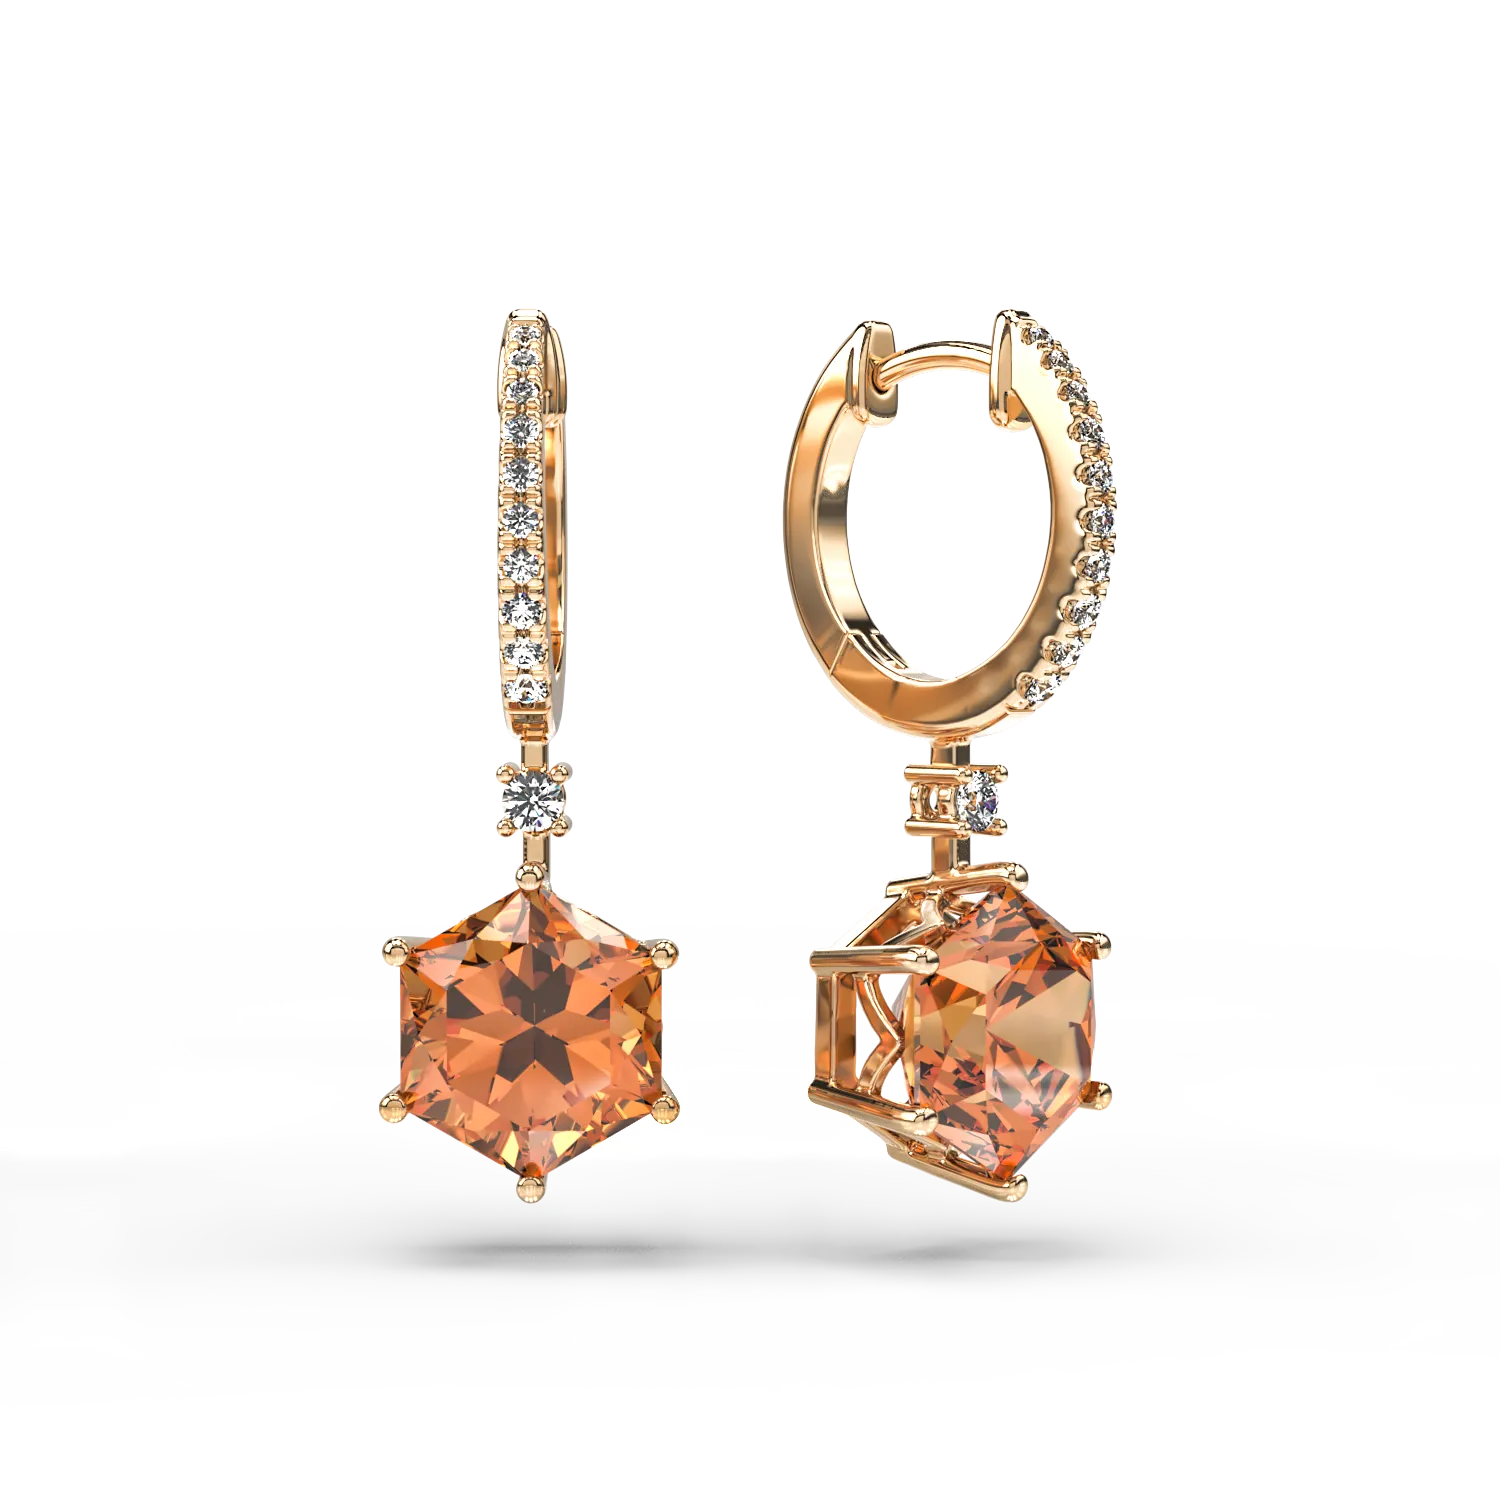 18K yellow gold earrings with 6.6ct citrine and 0.18ct diamonds